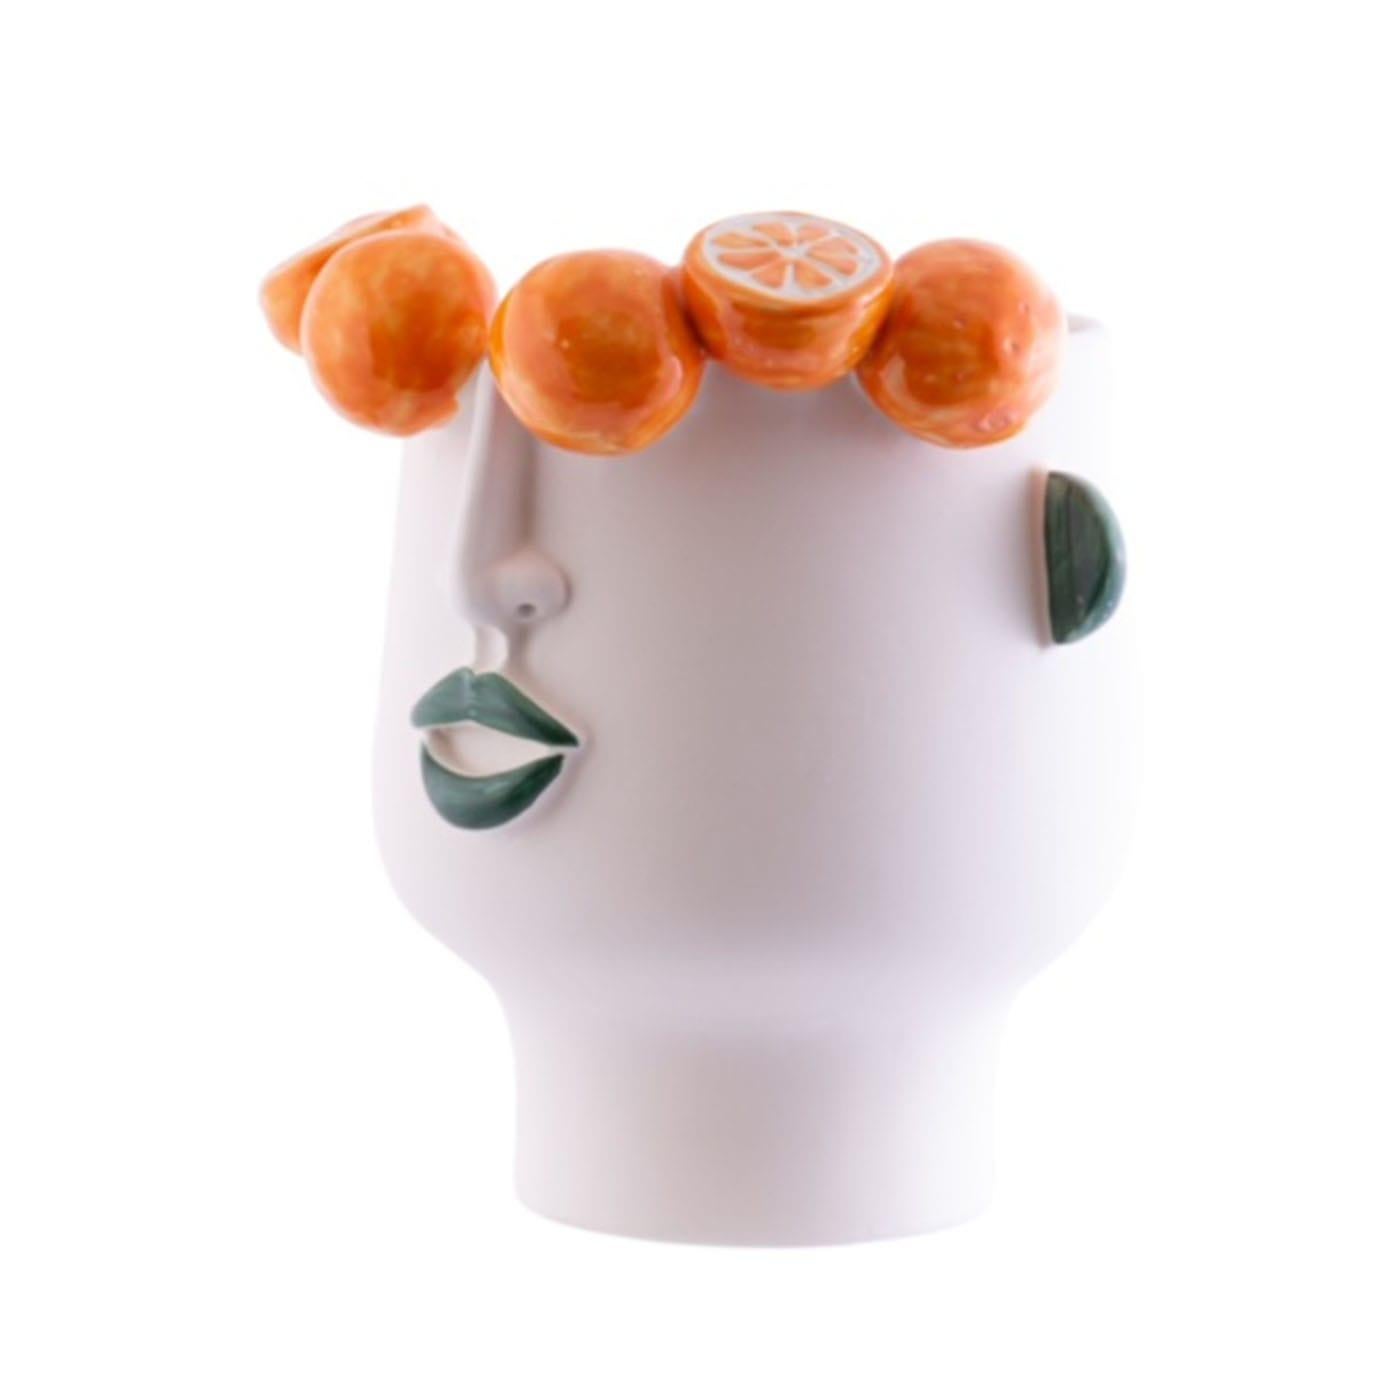 This large figurative vase is a captivating piece adorned with a stylized face and raised oranges, highlighted by a matte cream glaze and colorful crystals. Its spacious interior can accommodate water, making it an excellent vessel for flowers or